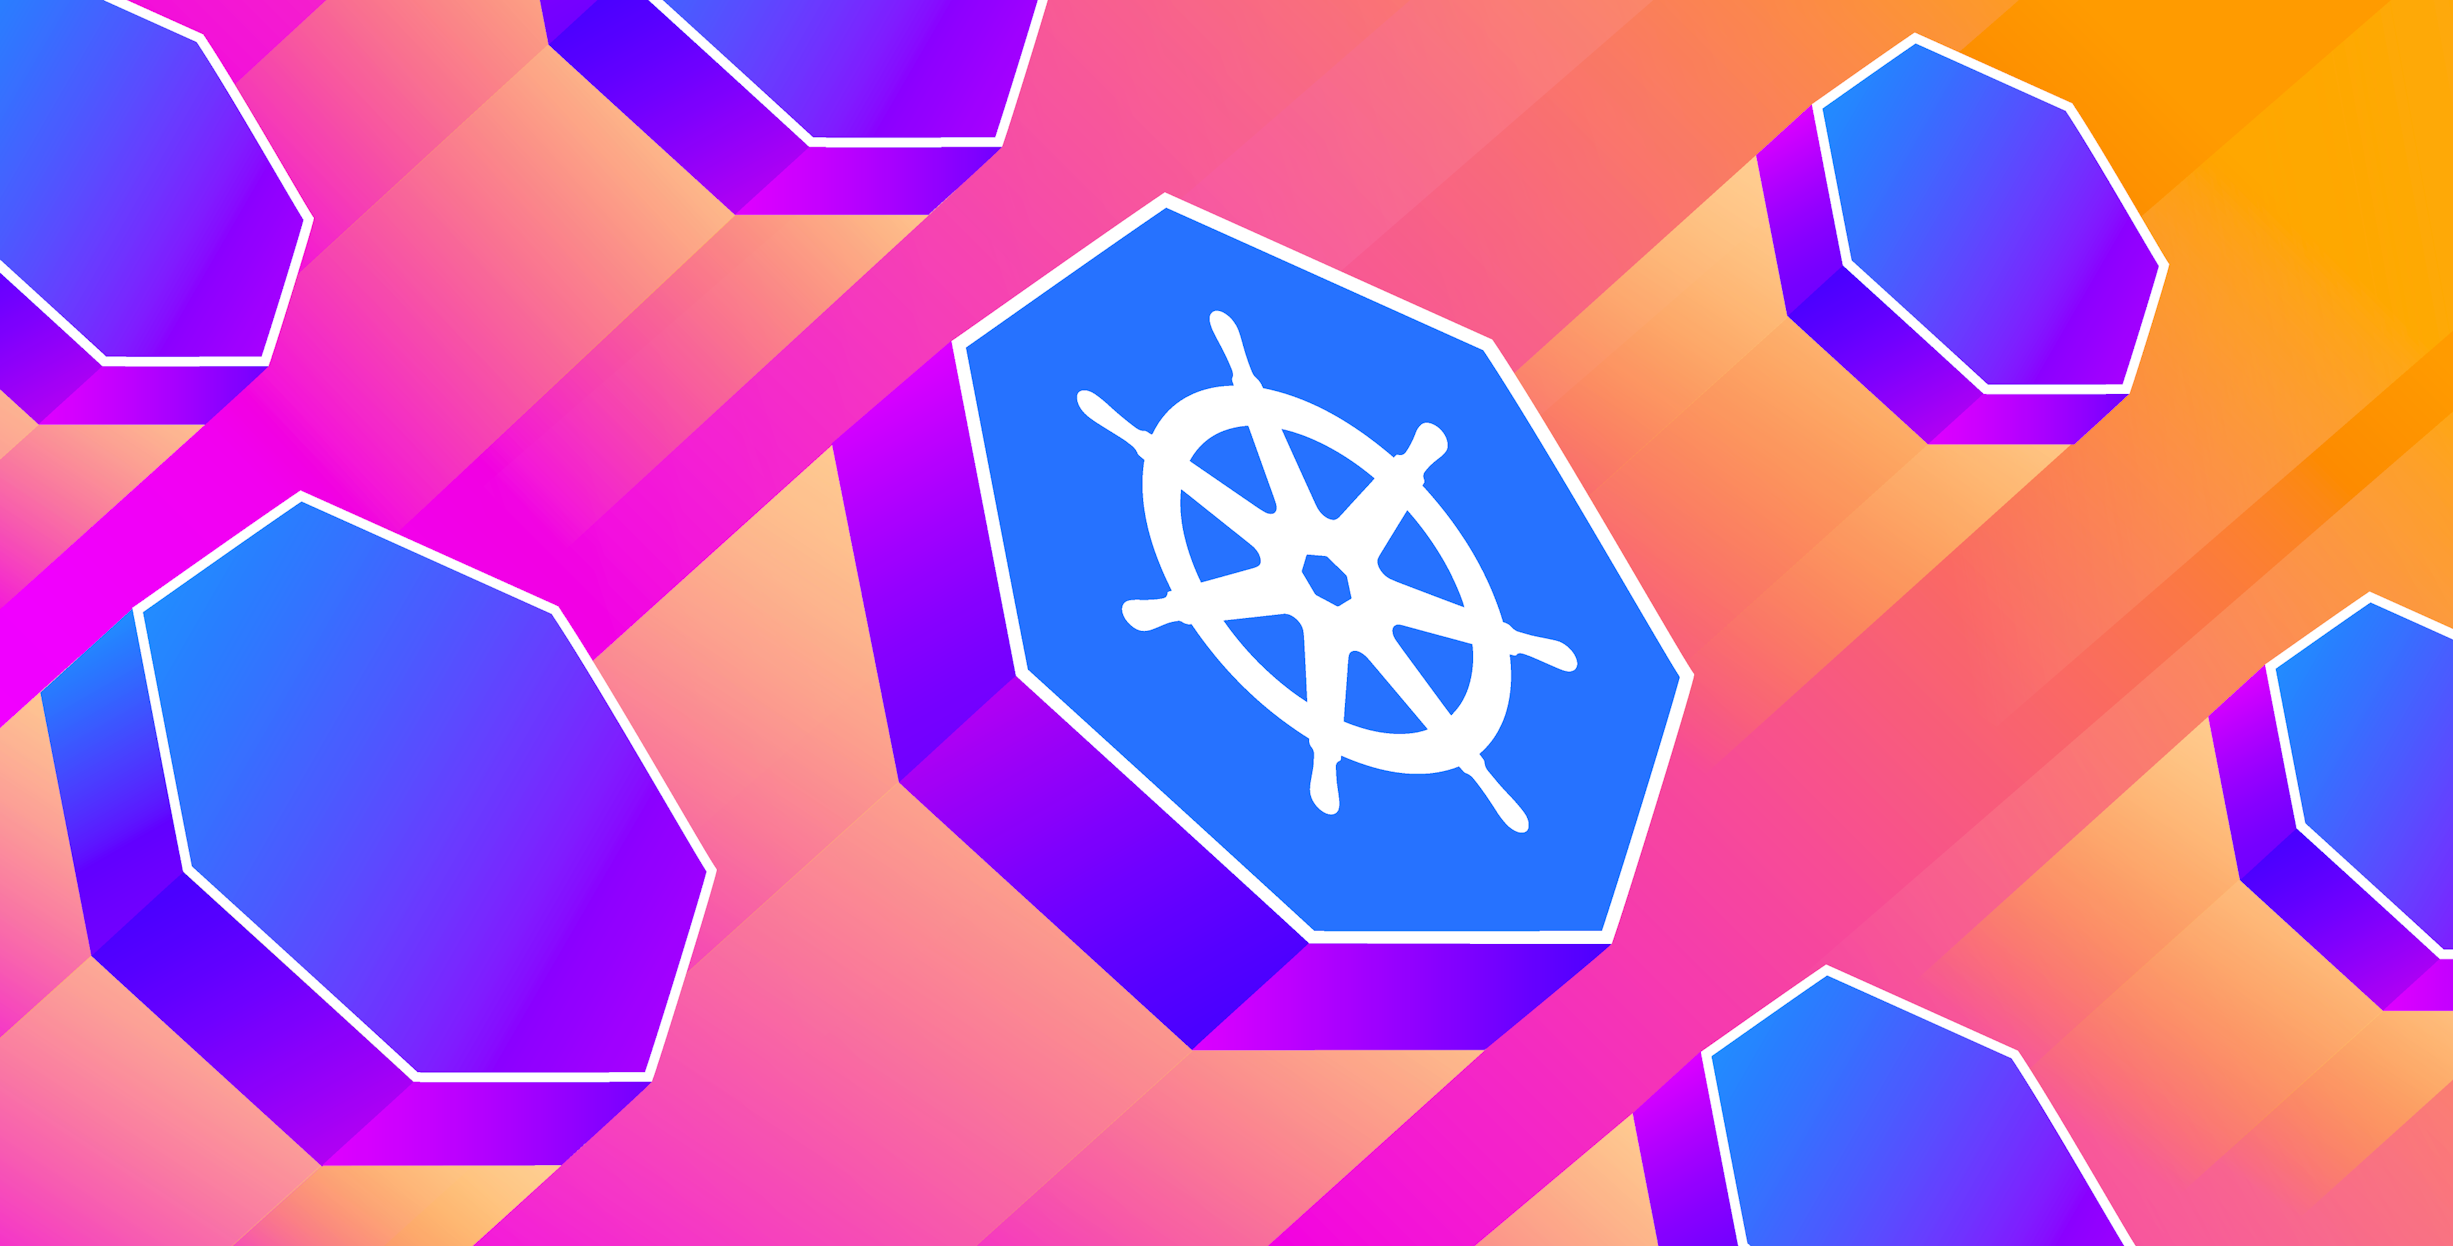 What's New For Security In Kubernetes 1.27